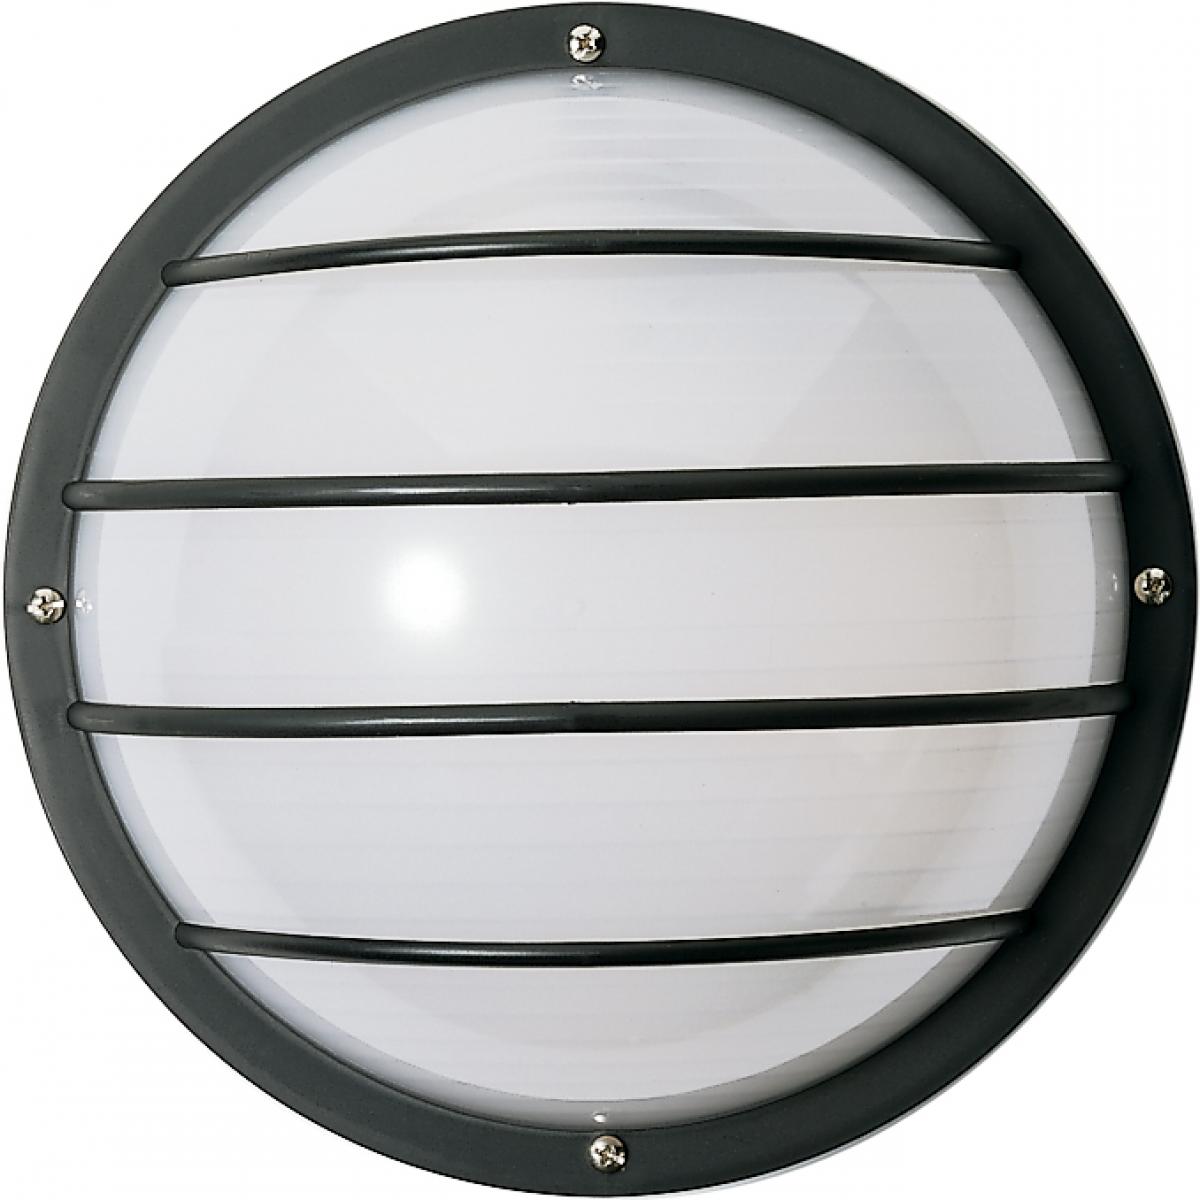 Satco 77-859 1 Light - 10" - Round Cage Wall Fixture - Polysynthetic Body & Lens - Black Finish